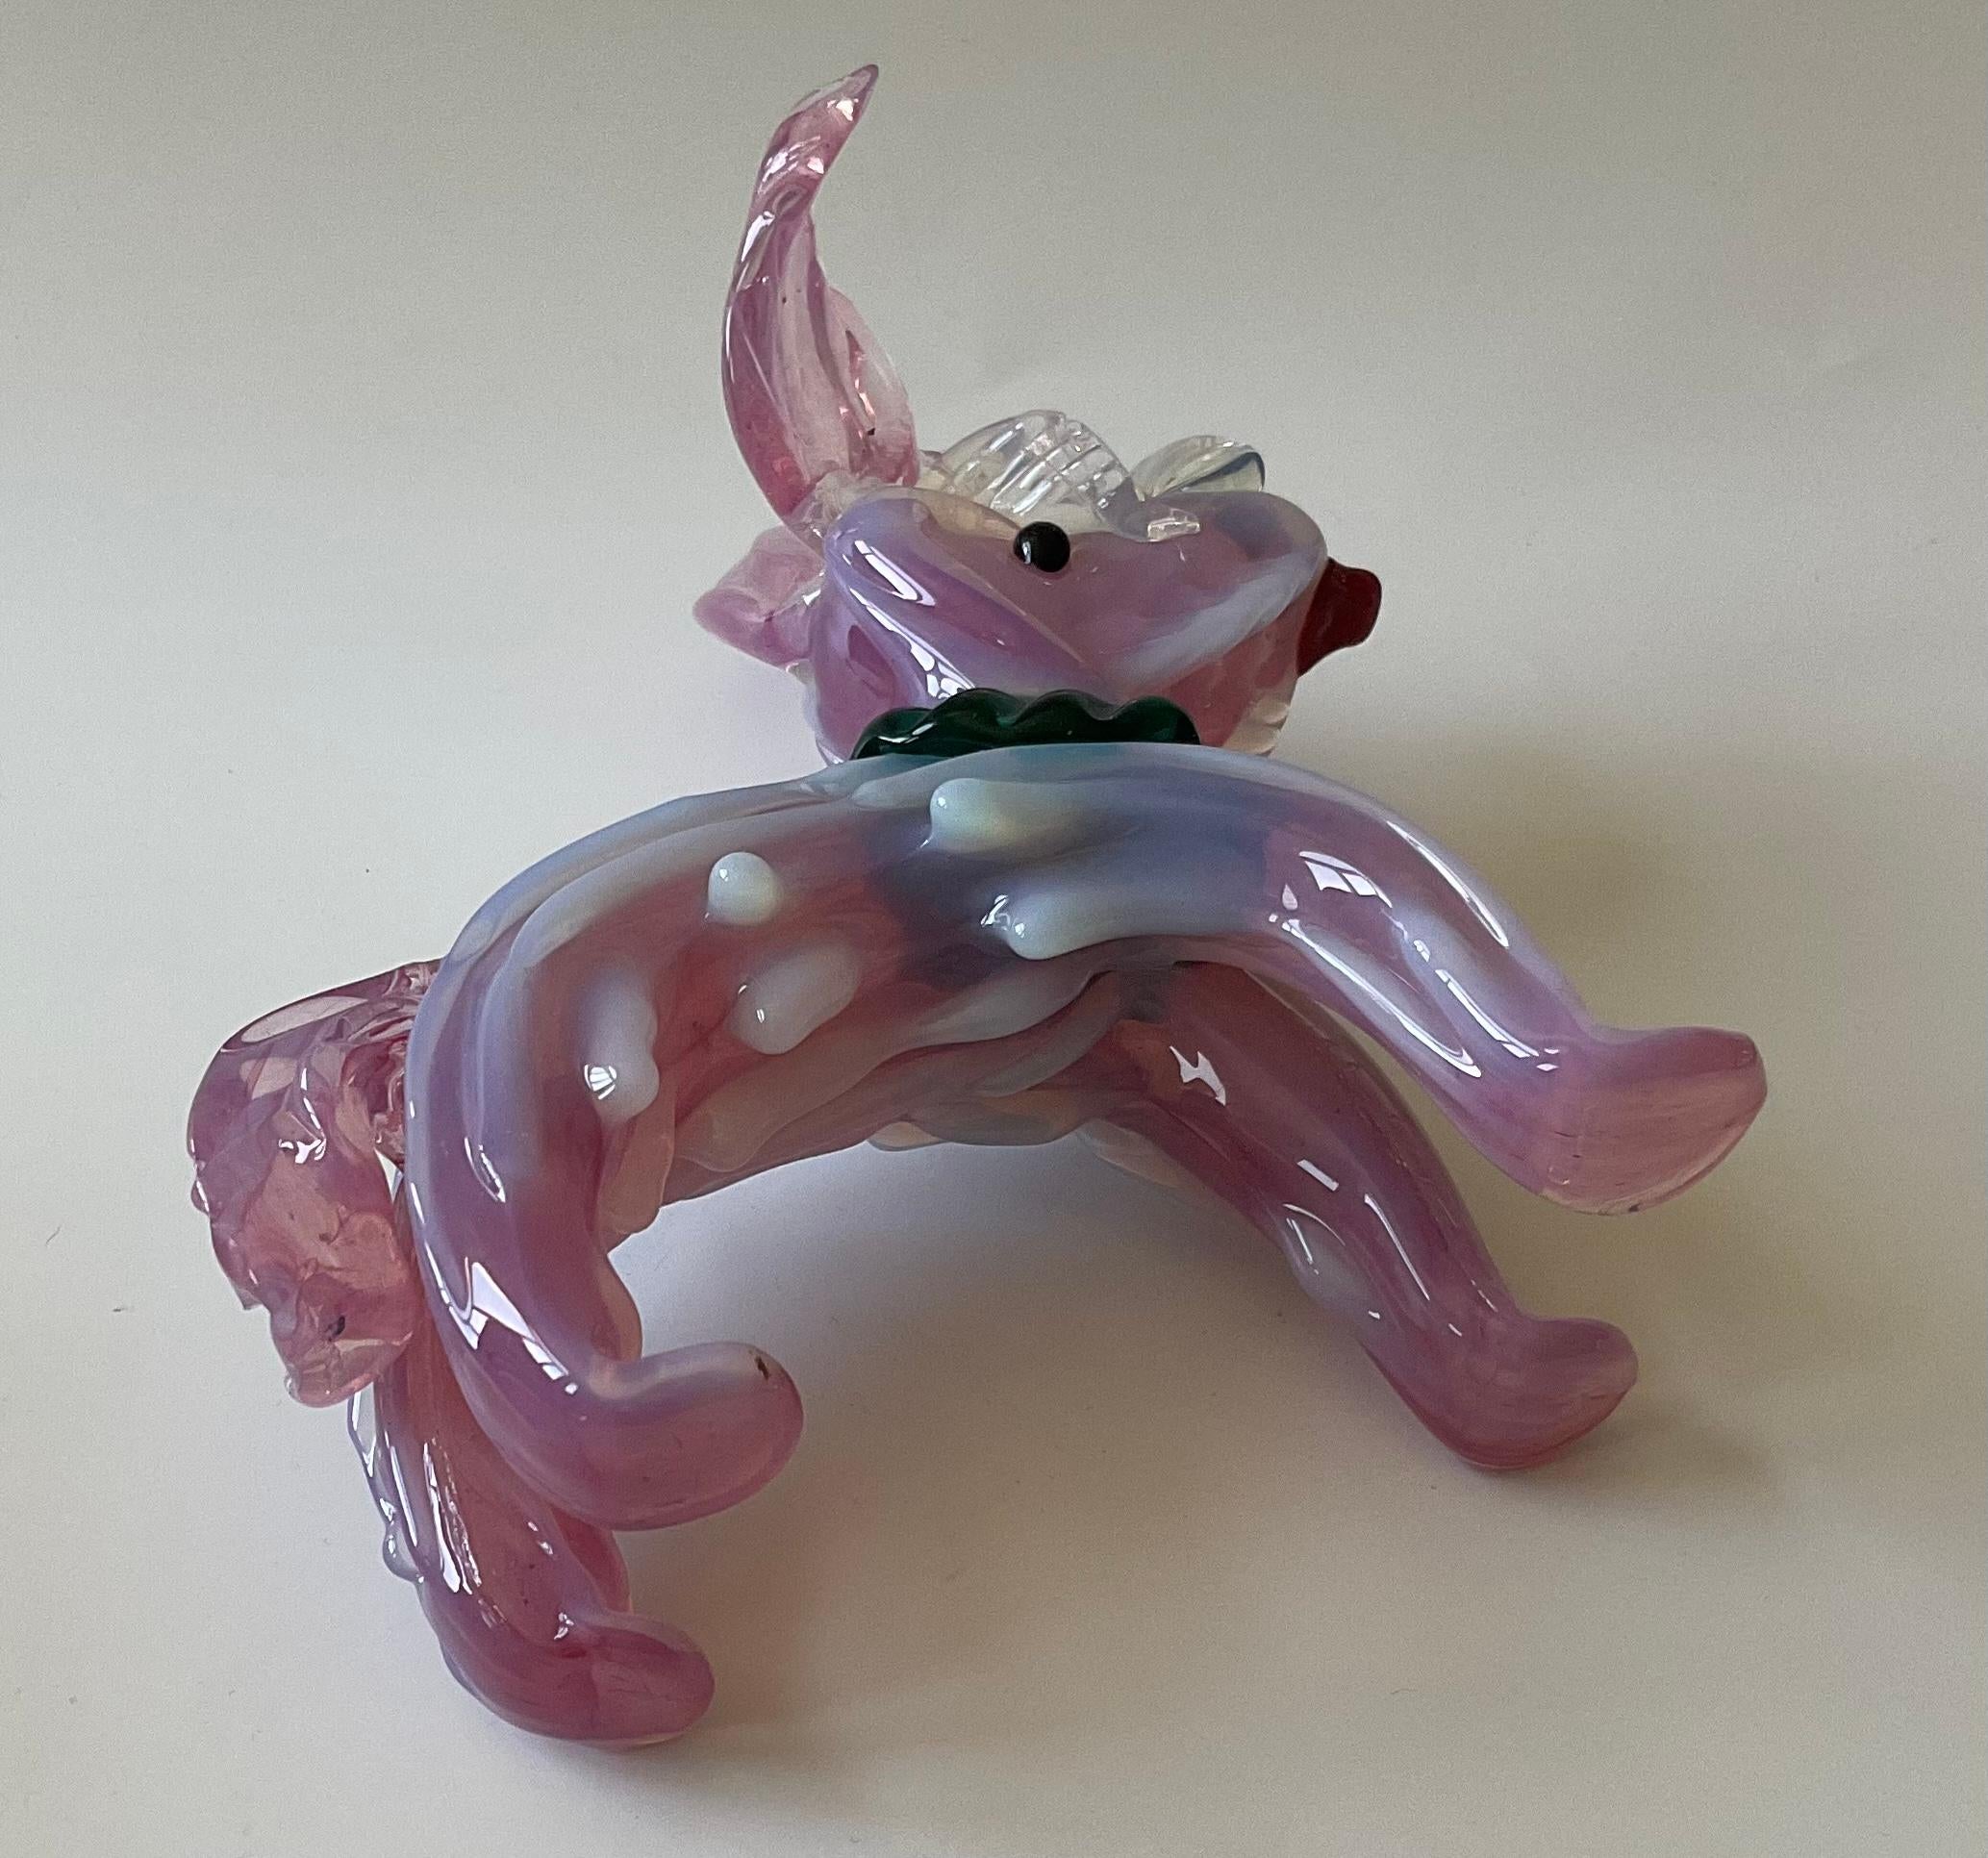 Barovier and Toso Murano Art Glass dog sculpture in pink and opalescent glass Designed by Ercole Barovier. Amazing quality and execution.